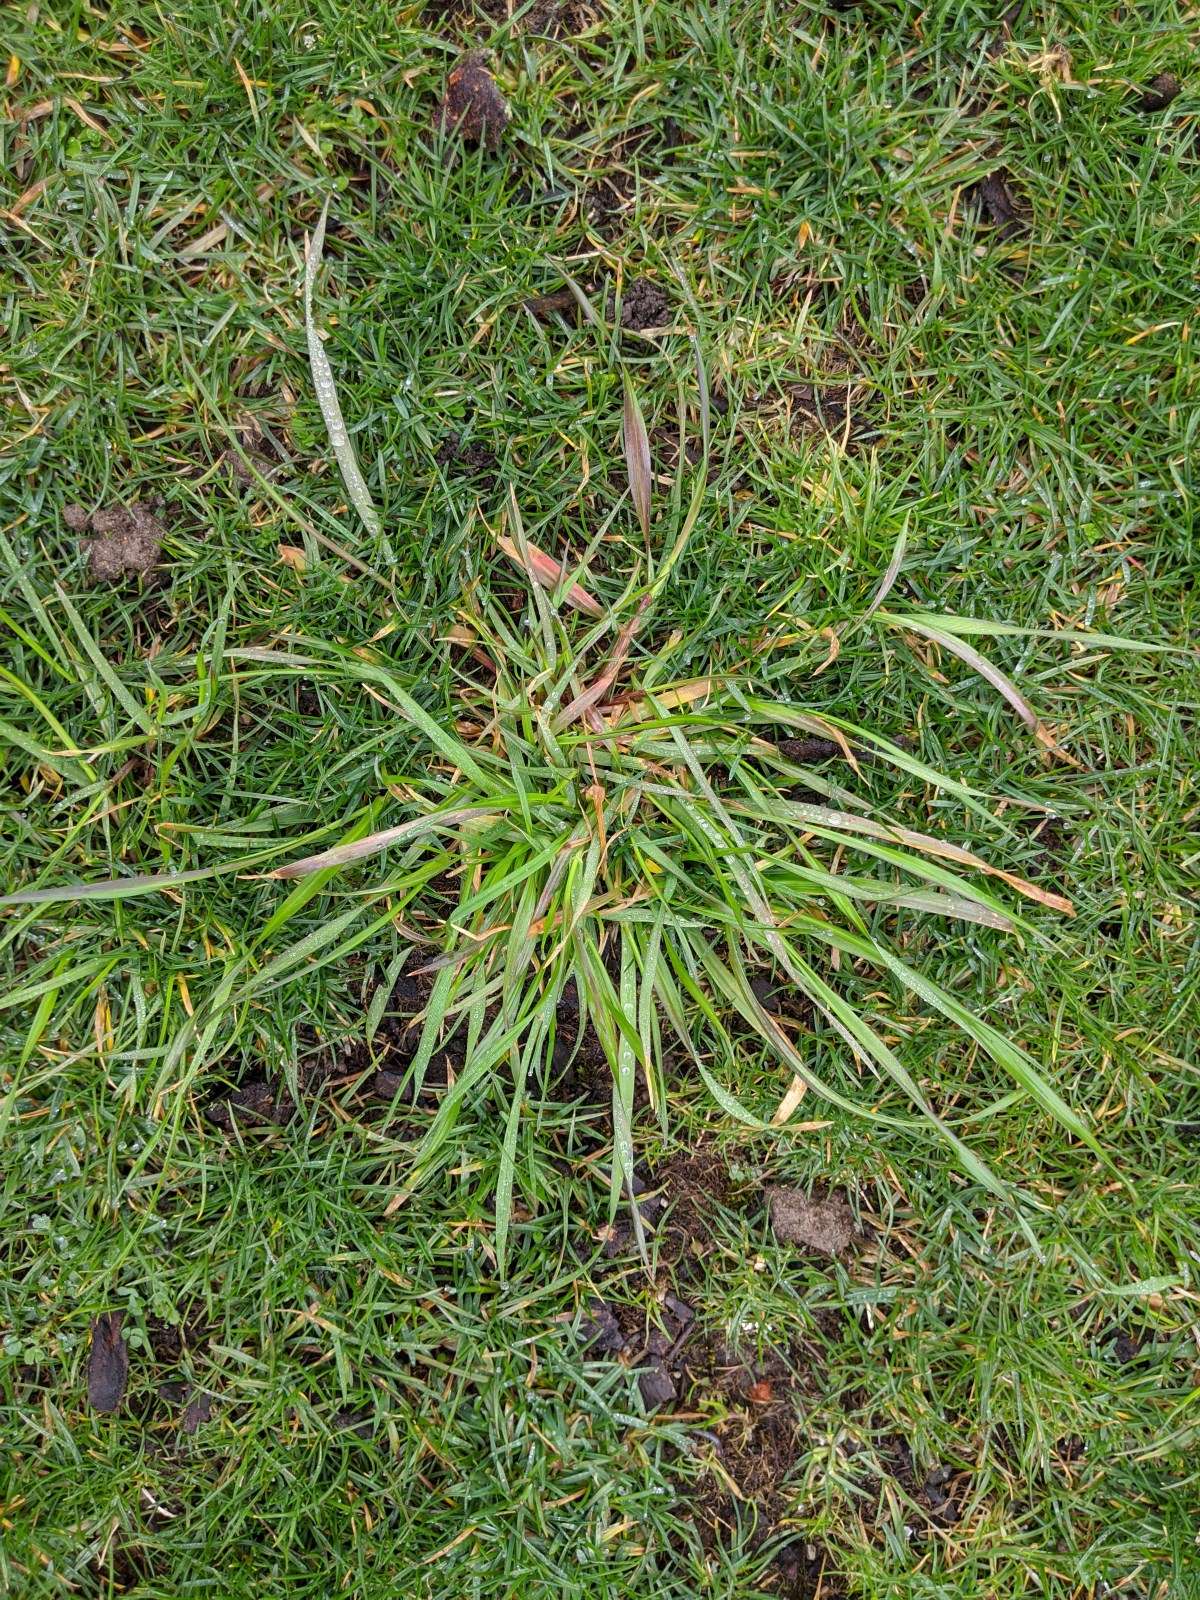 Is this Quackgrass?